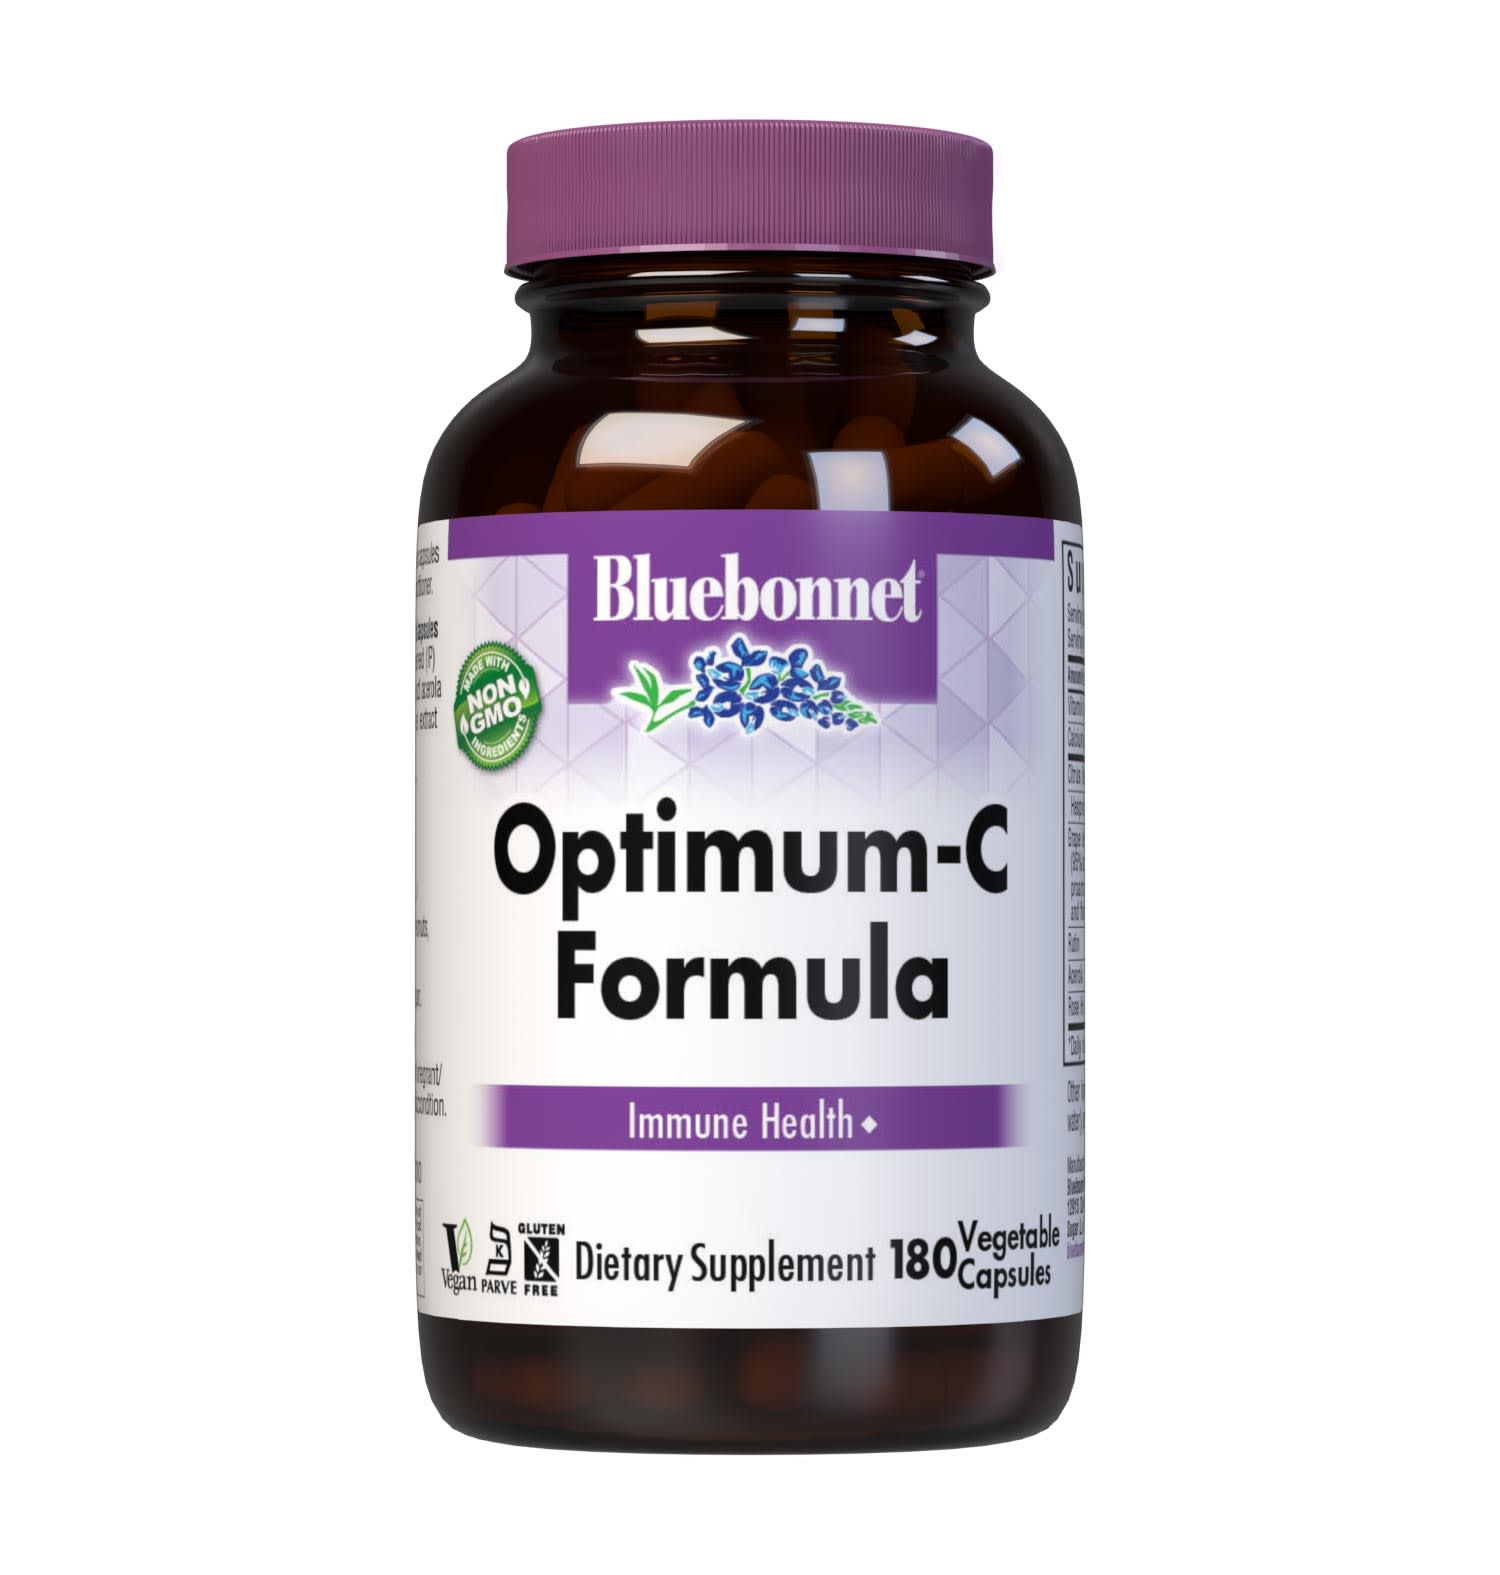 Bluebonnet’s Optimum-C Formula 180 Vegetable Capsules are formulated with non-GMO, identity preserved (IP) vitamin C from calcium ascorbate, rose hips and acerola along with citrus bioflavonoids and grape seed extract to help support immune function. #size_180 count